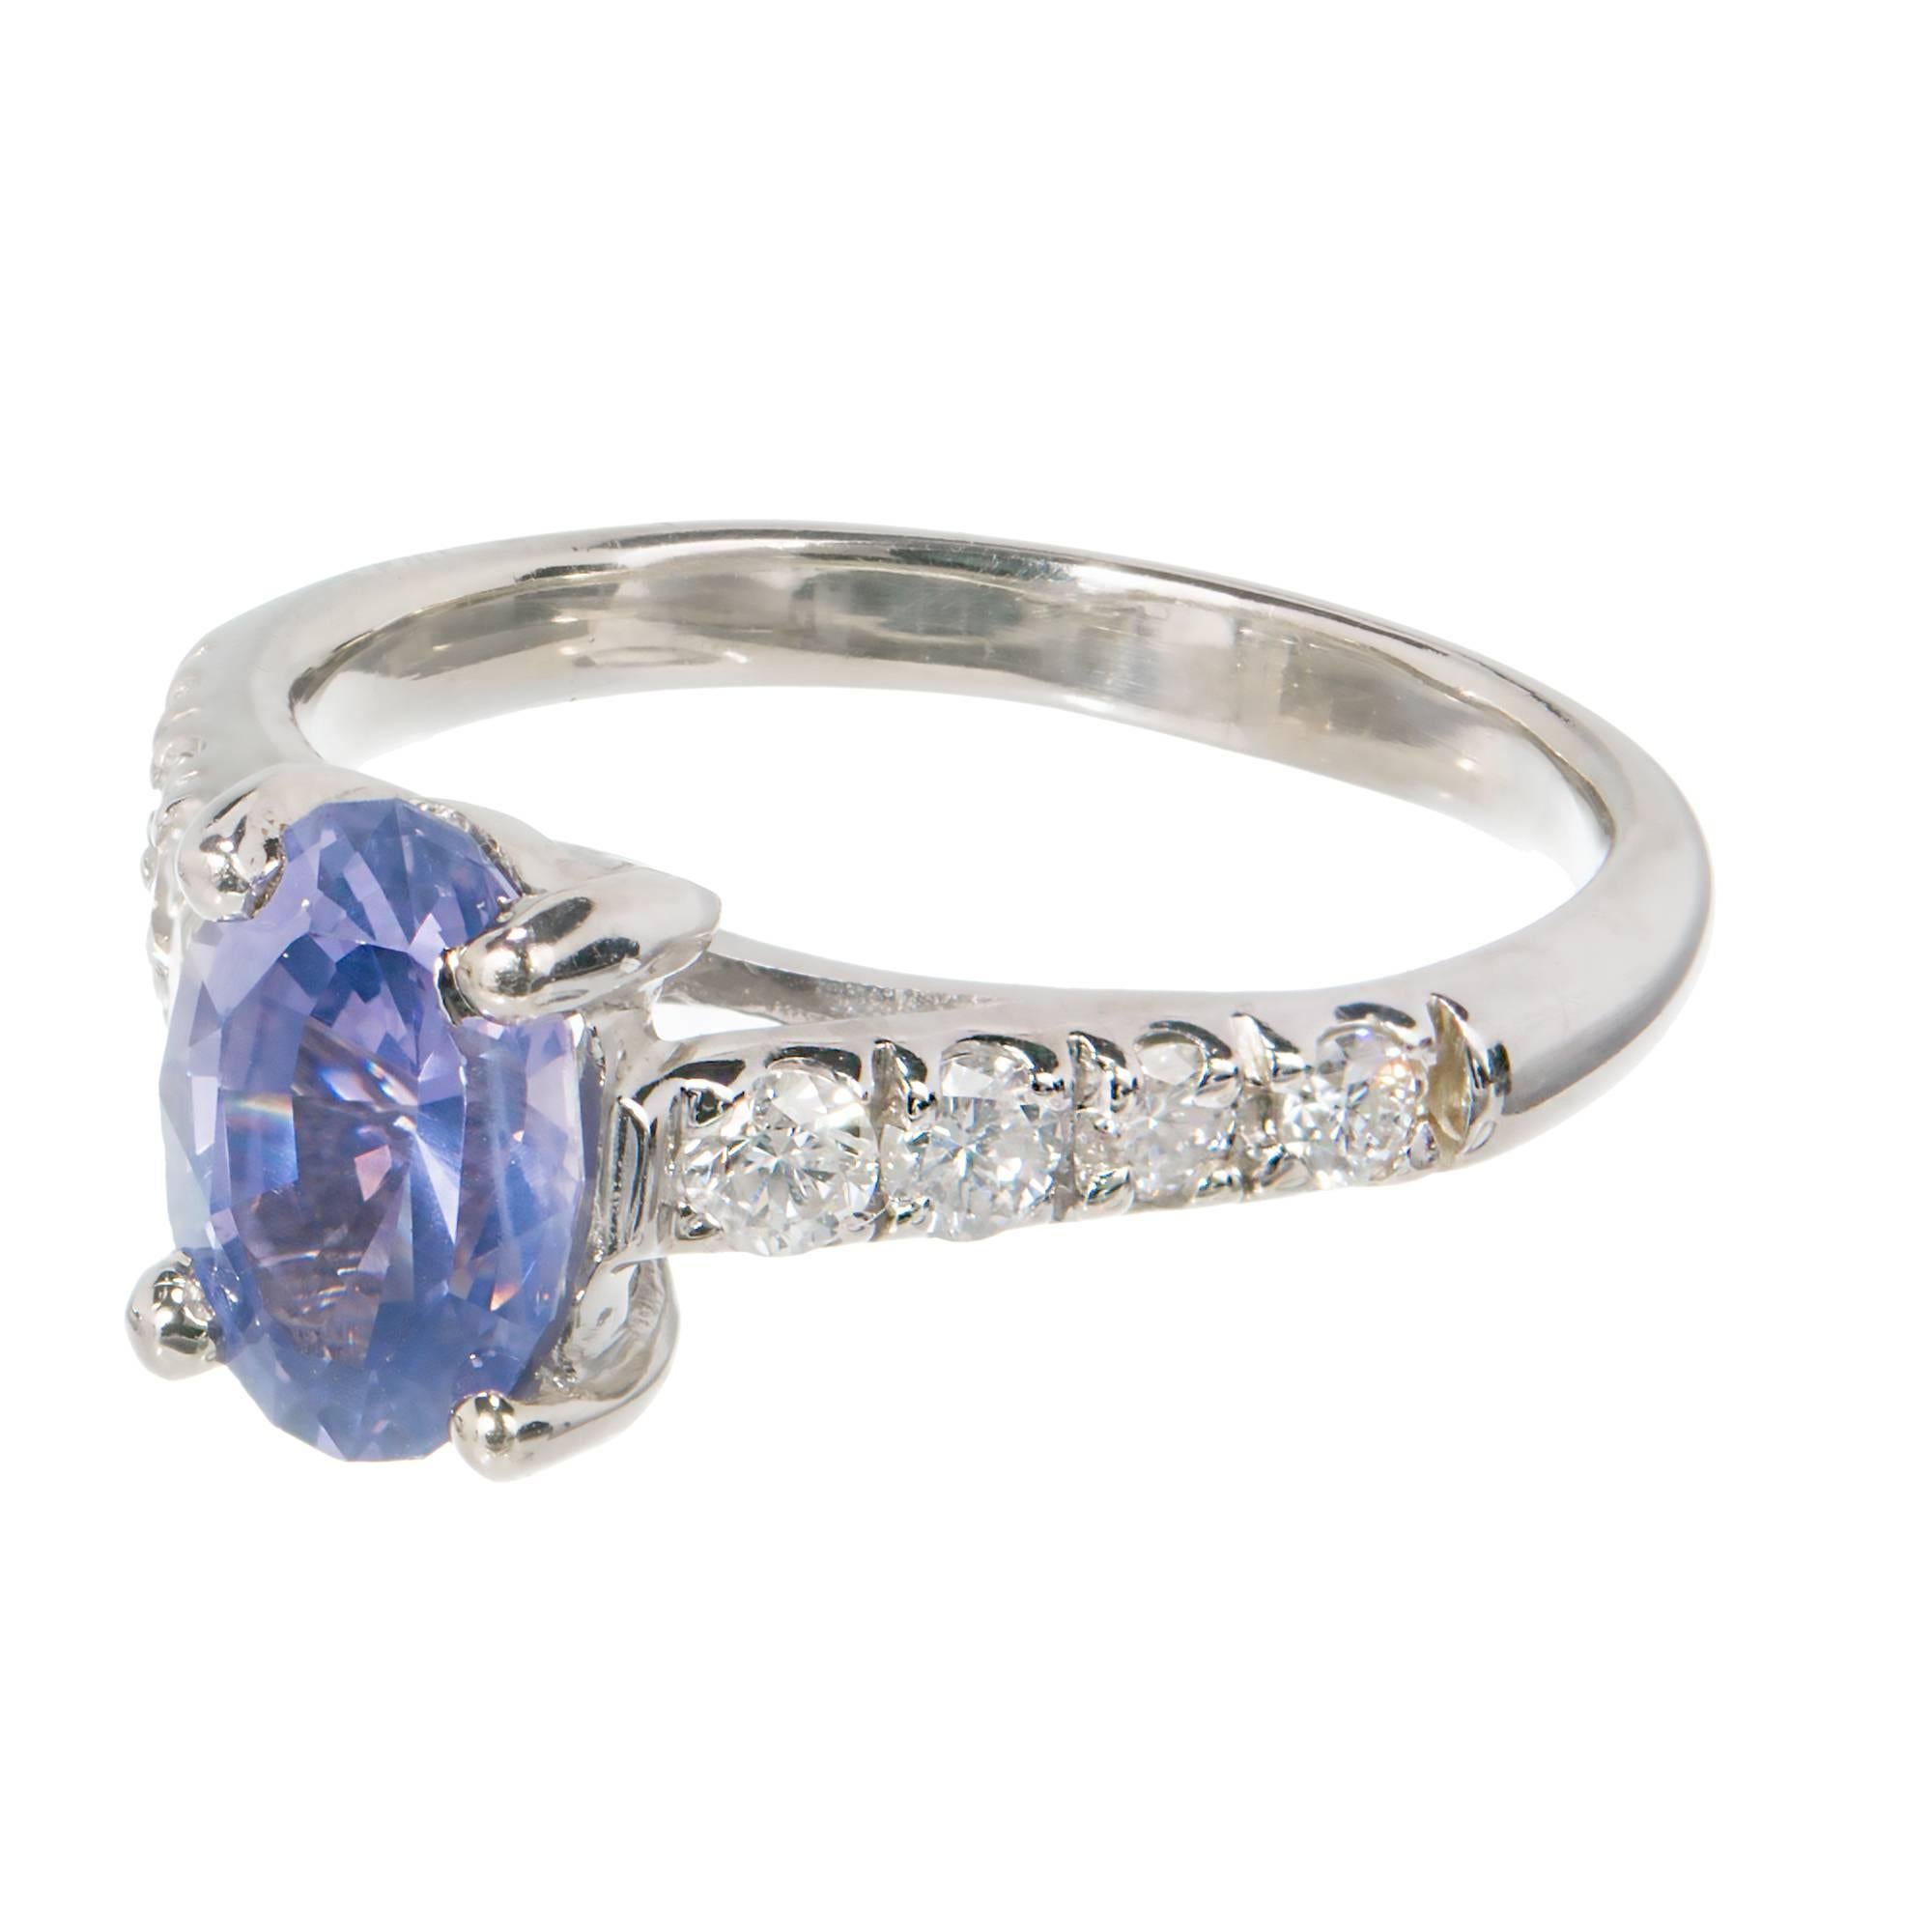 Peter Suchy Natural no heat AGL certified bluish violet 1.60ct oval Sapphire engagement ring, in a solid Platinum ring with crossed prong top and fine diamond accents.

1 AGL certified natural no heat and no enhancements medium bluish violet super